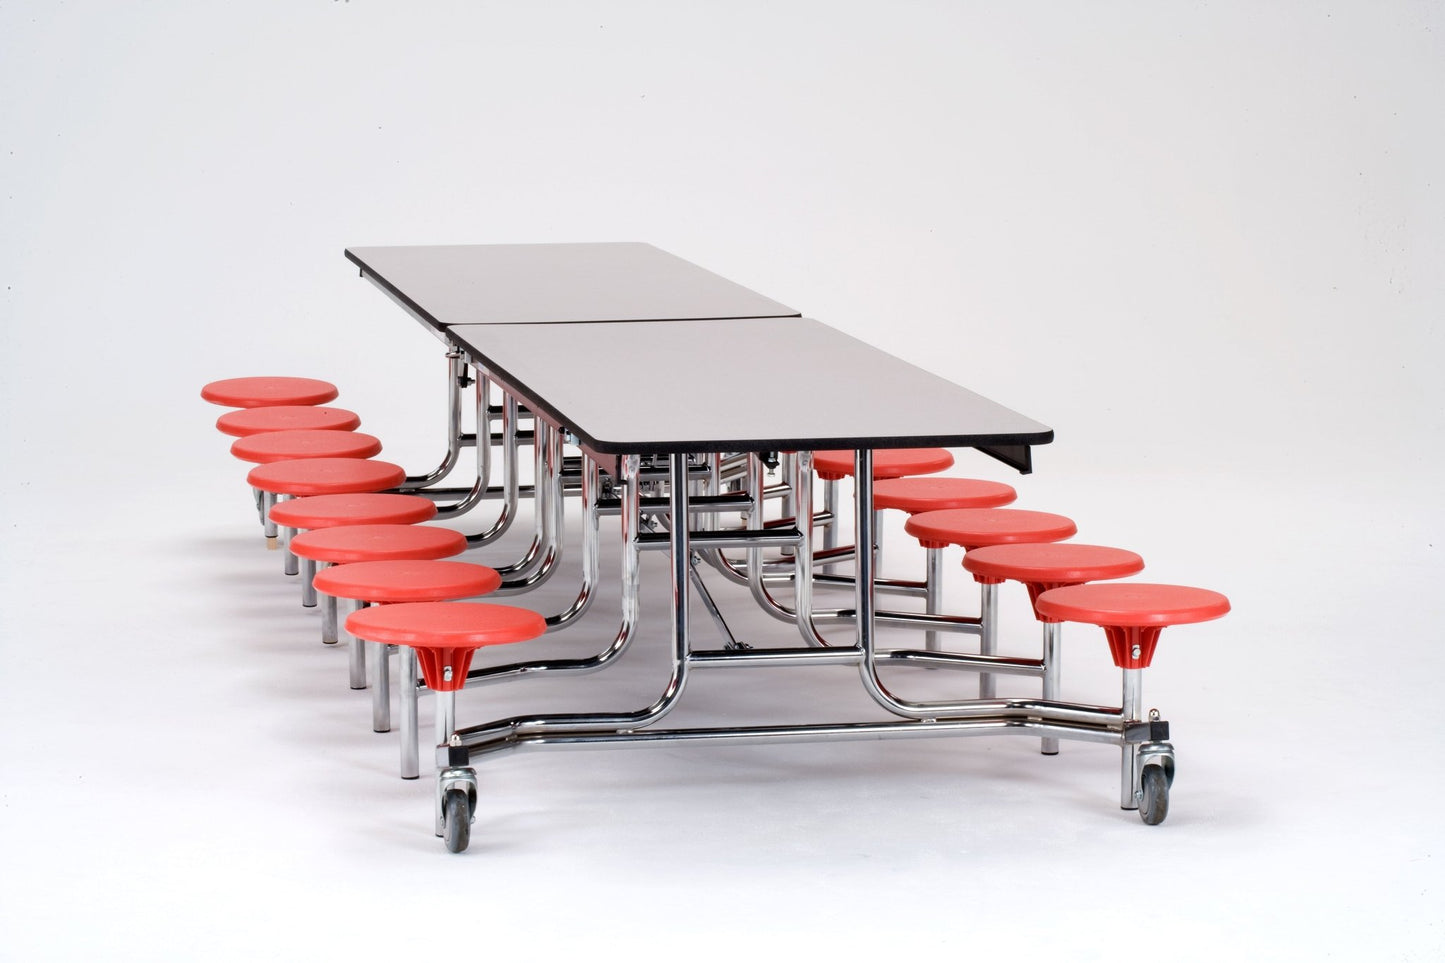 NPS Mobile Cafeteria Table - 30" W x 12' L - 16 Stools - Plywood Core - Protect Edge - Chrome Frame - SchoolOutlet